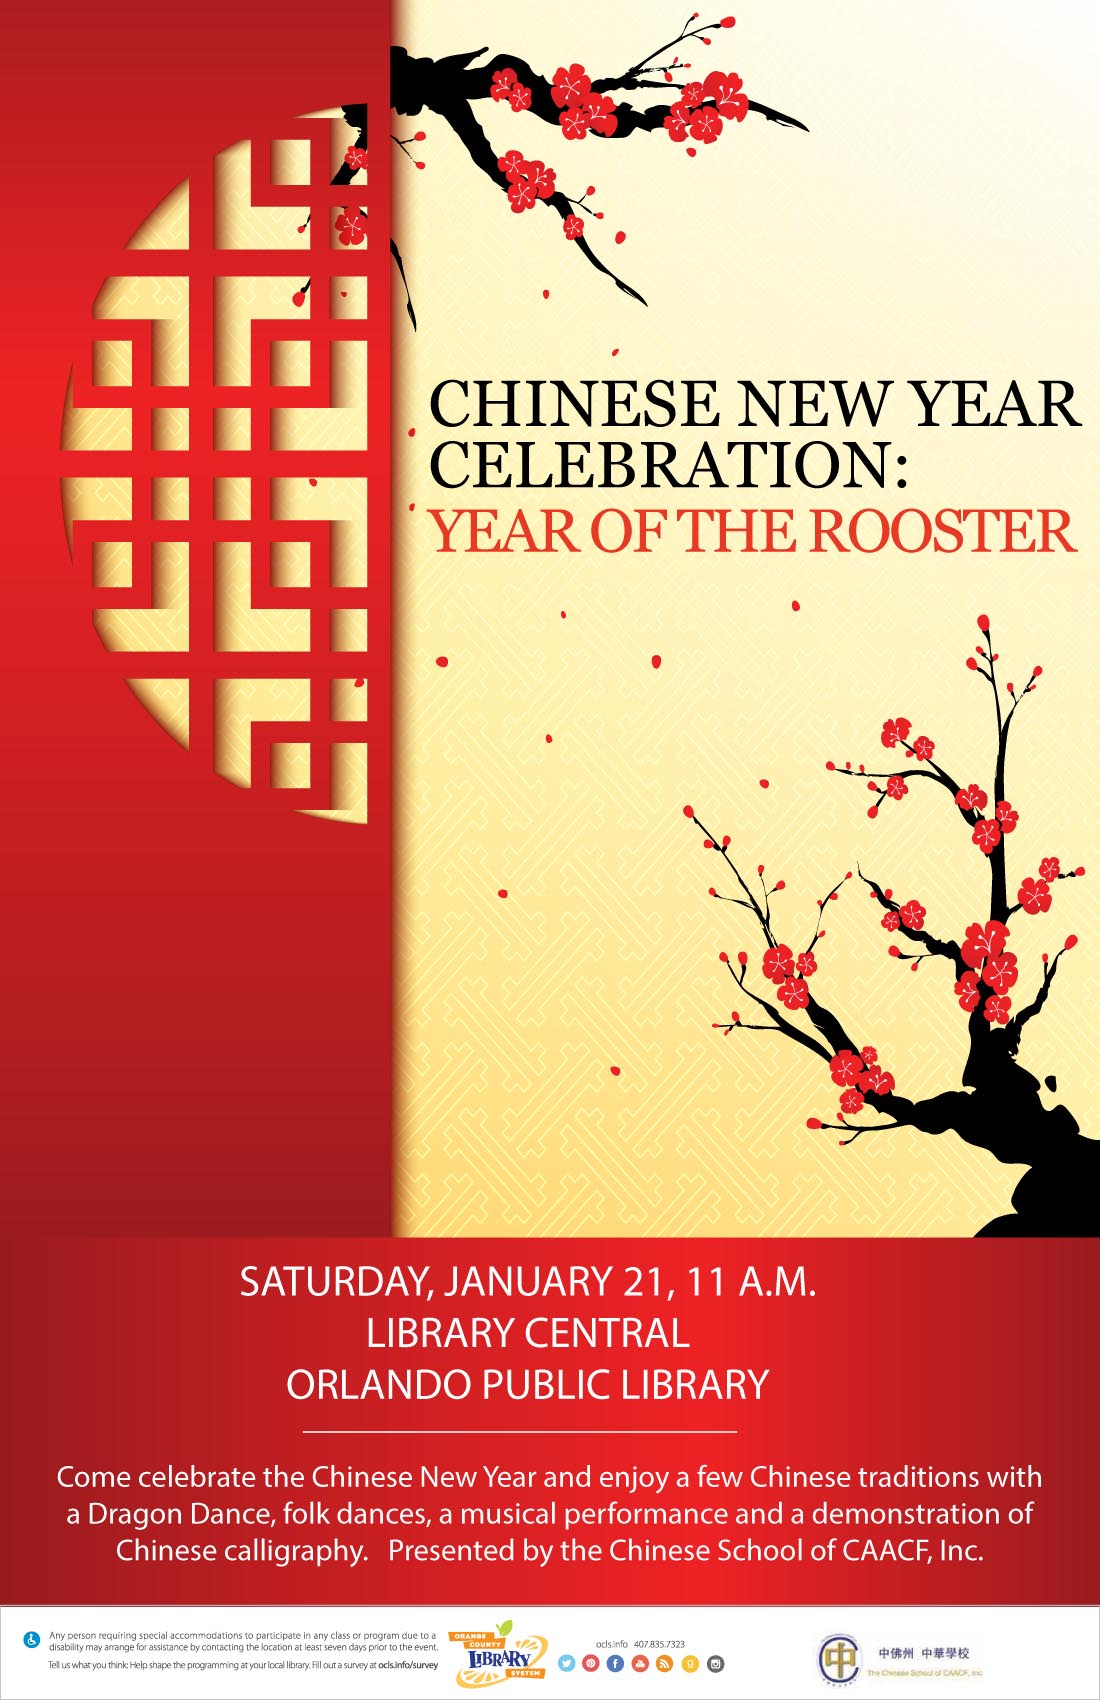 CHINESE NEW YEAR CELEBRATION: YEAR OF THE ROOSTER